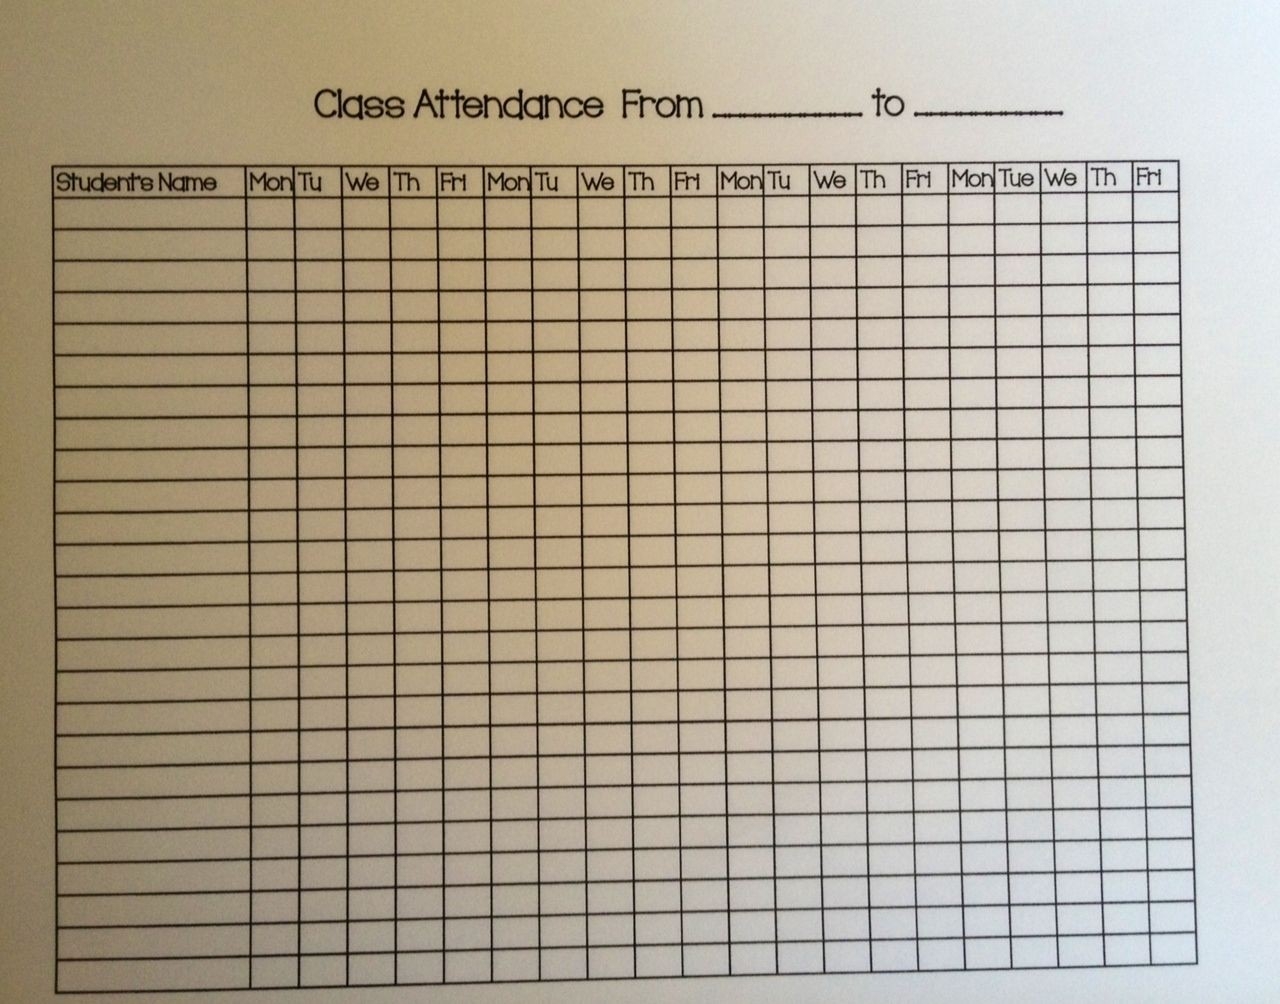 This Is Just A Simple Attendance Sheet For You To Keep Track-Free Attendance Sheet Pdf 2021